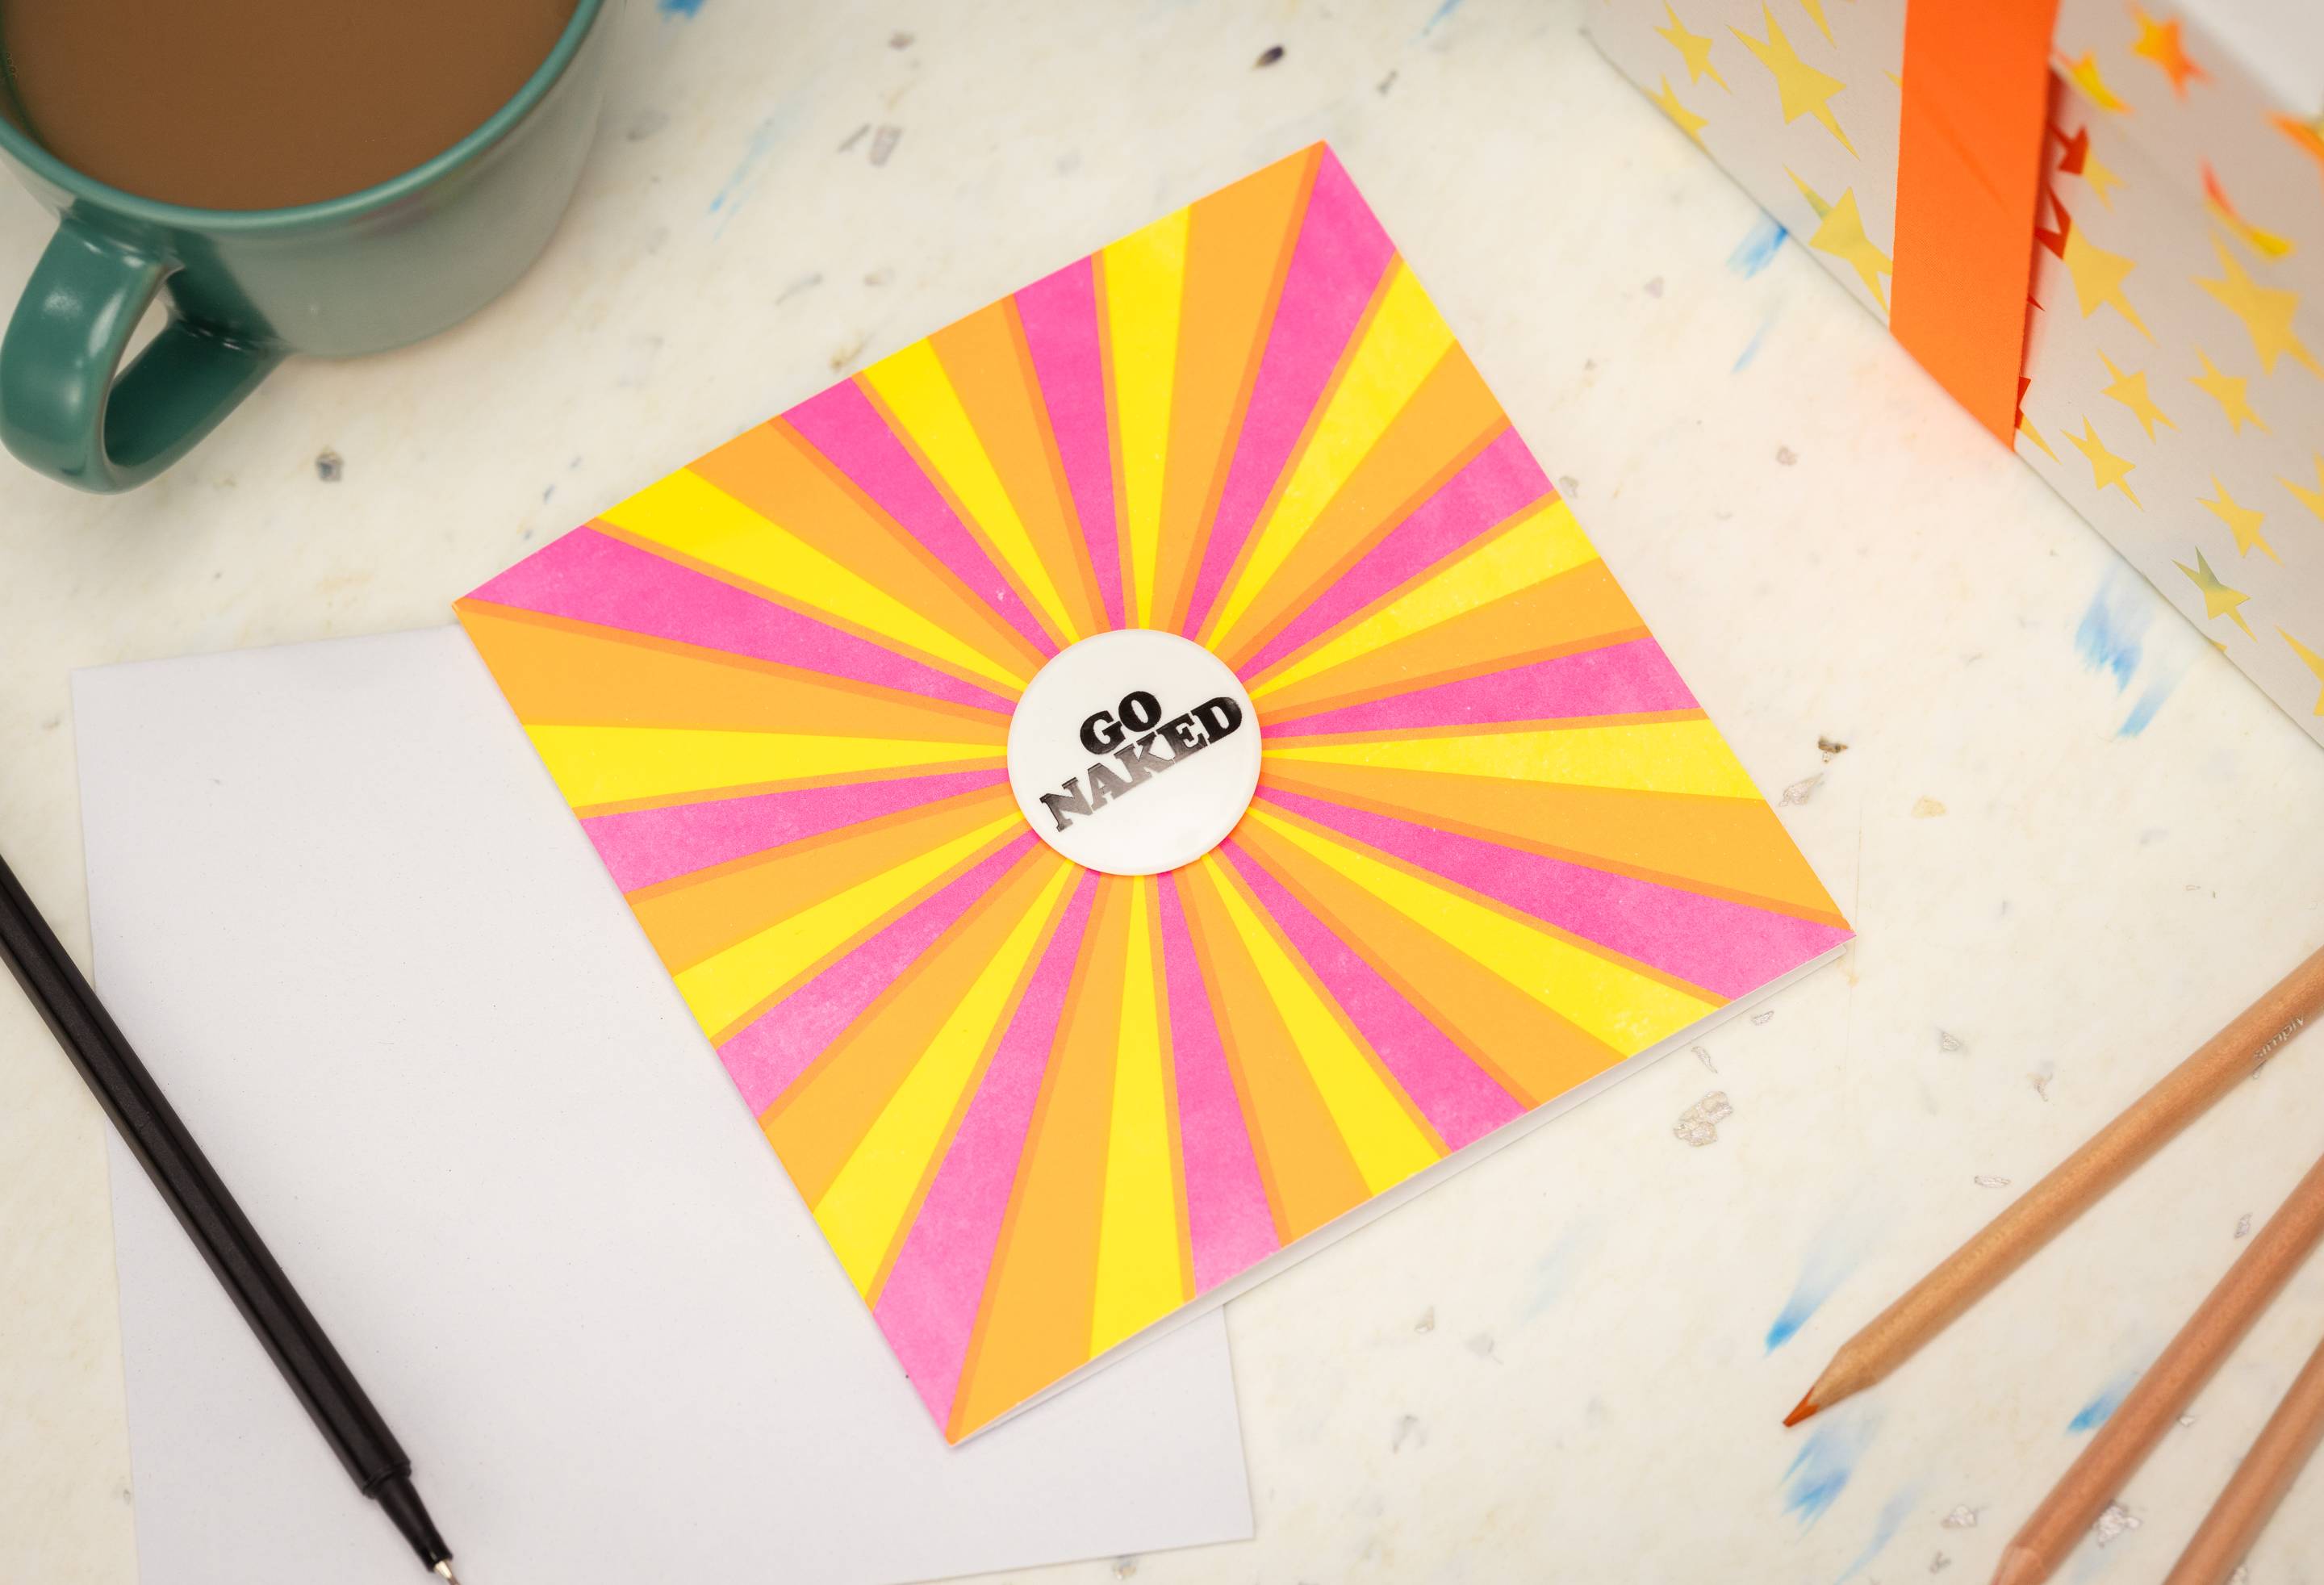 The vibrant "Go Naked" card and badge lay flat on a table surrounded by a wrapped gift, a pen and a mug of coffee.